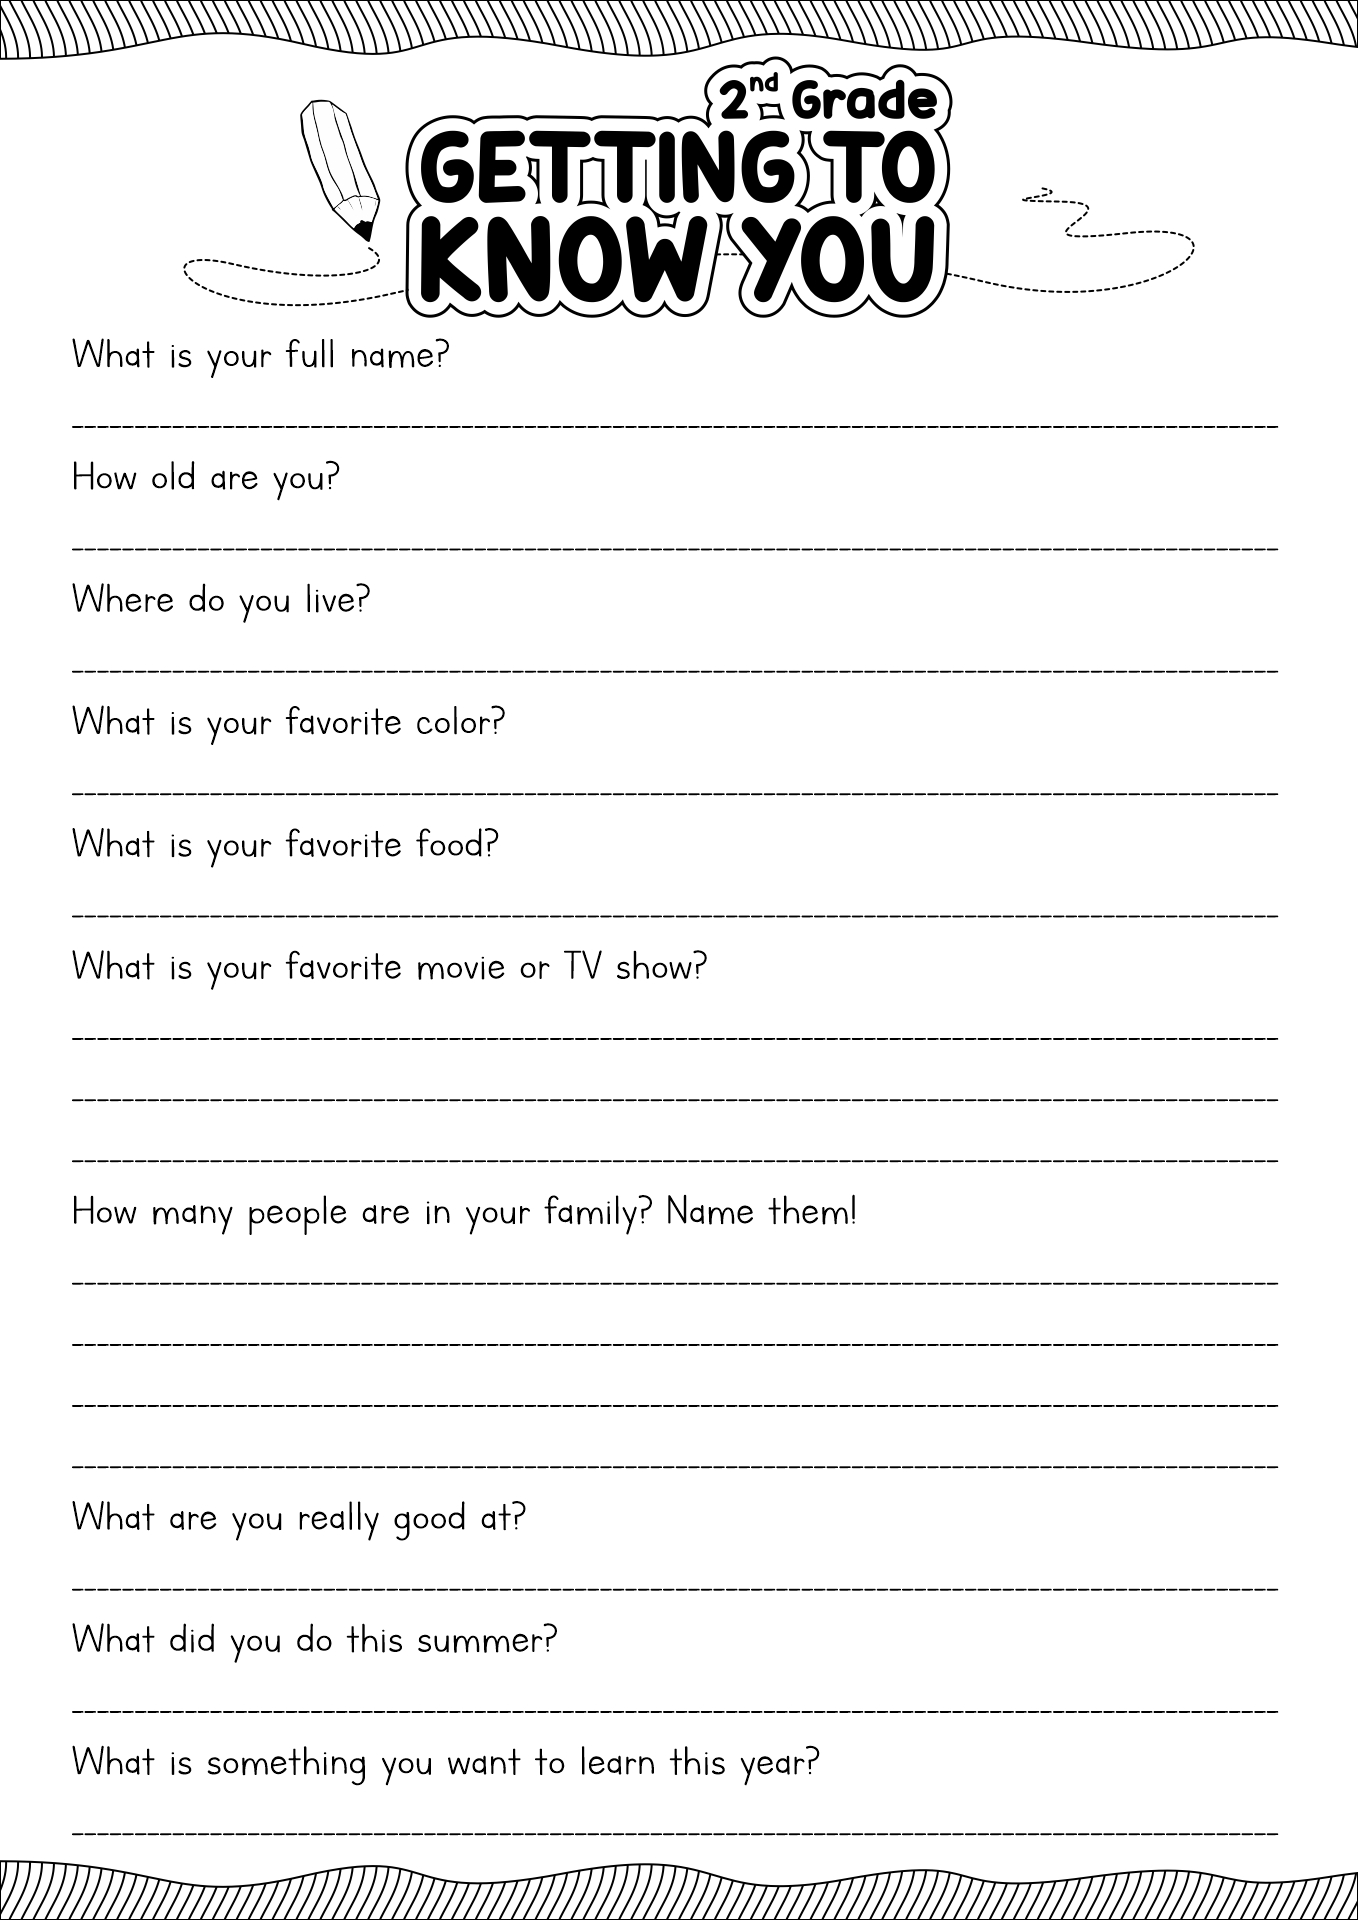 Getting to Know You Worksheets 2nd Grade Image